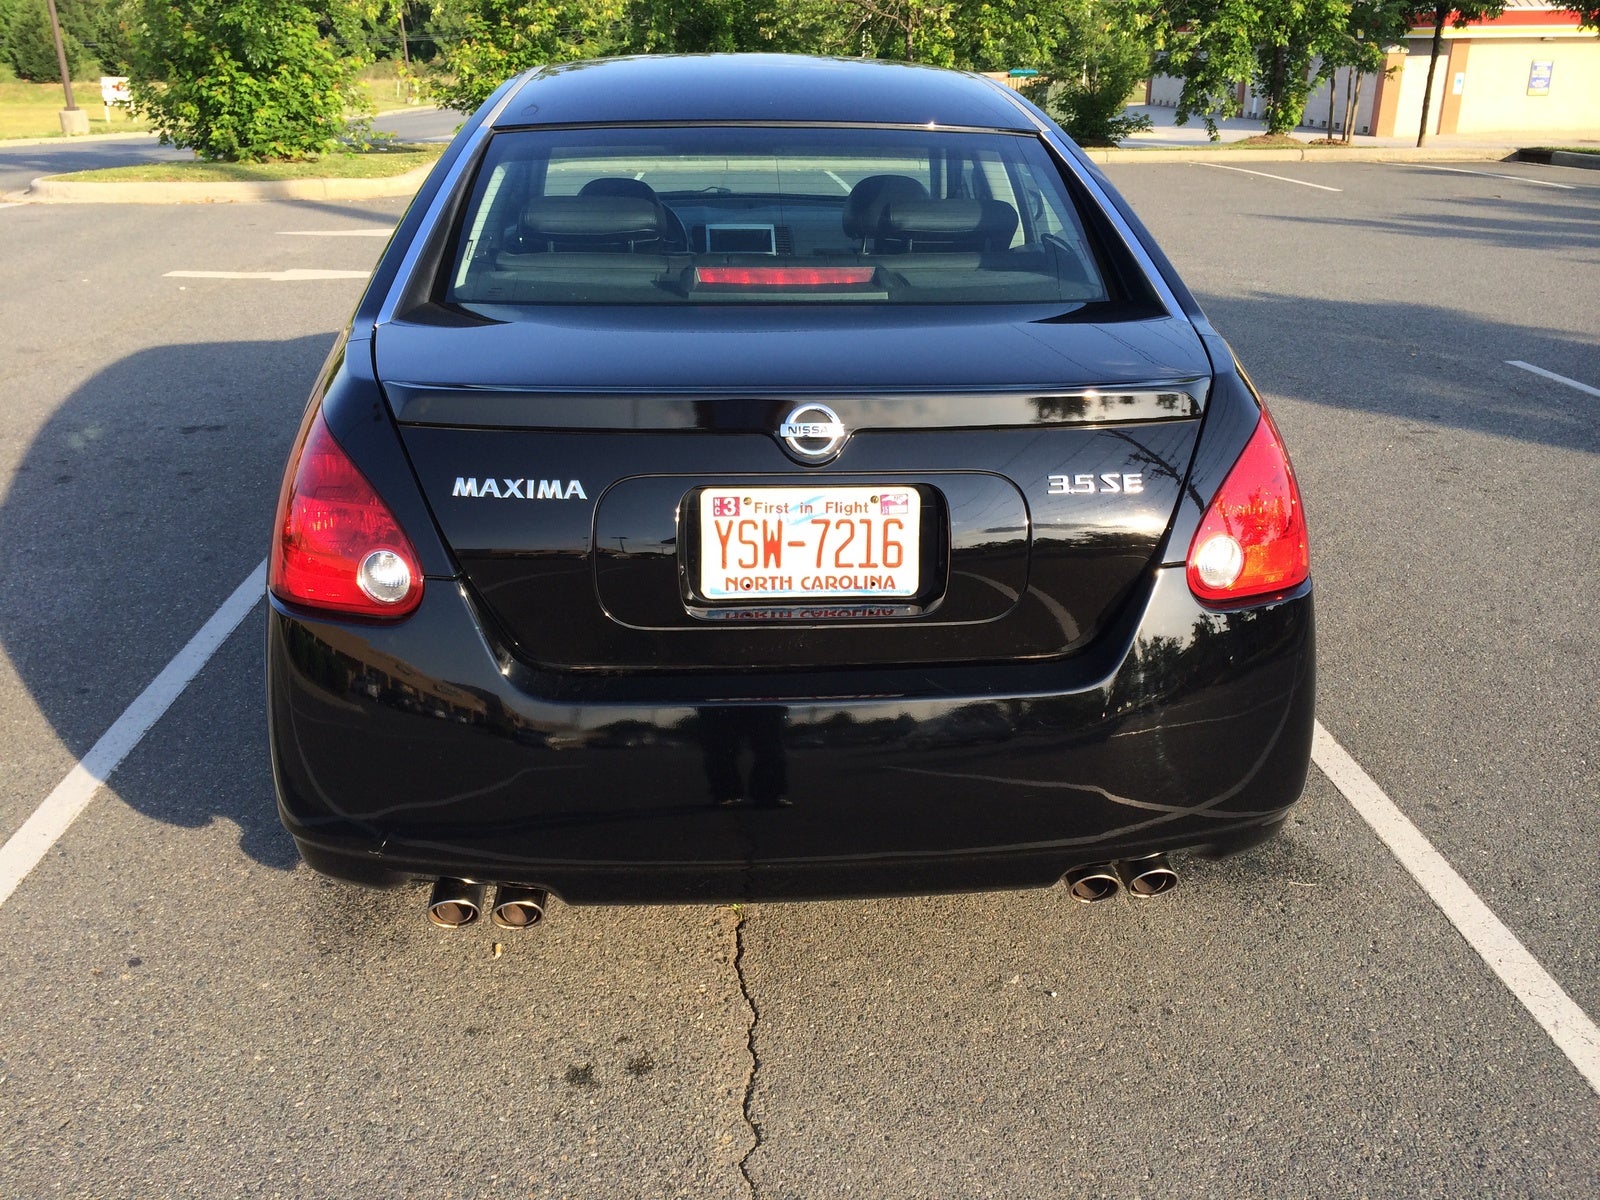 Problems with the 2006 nissan maxima #4